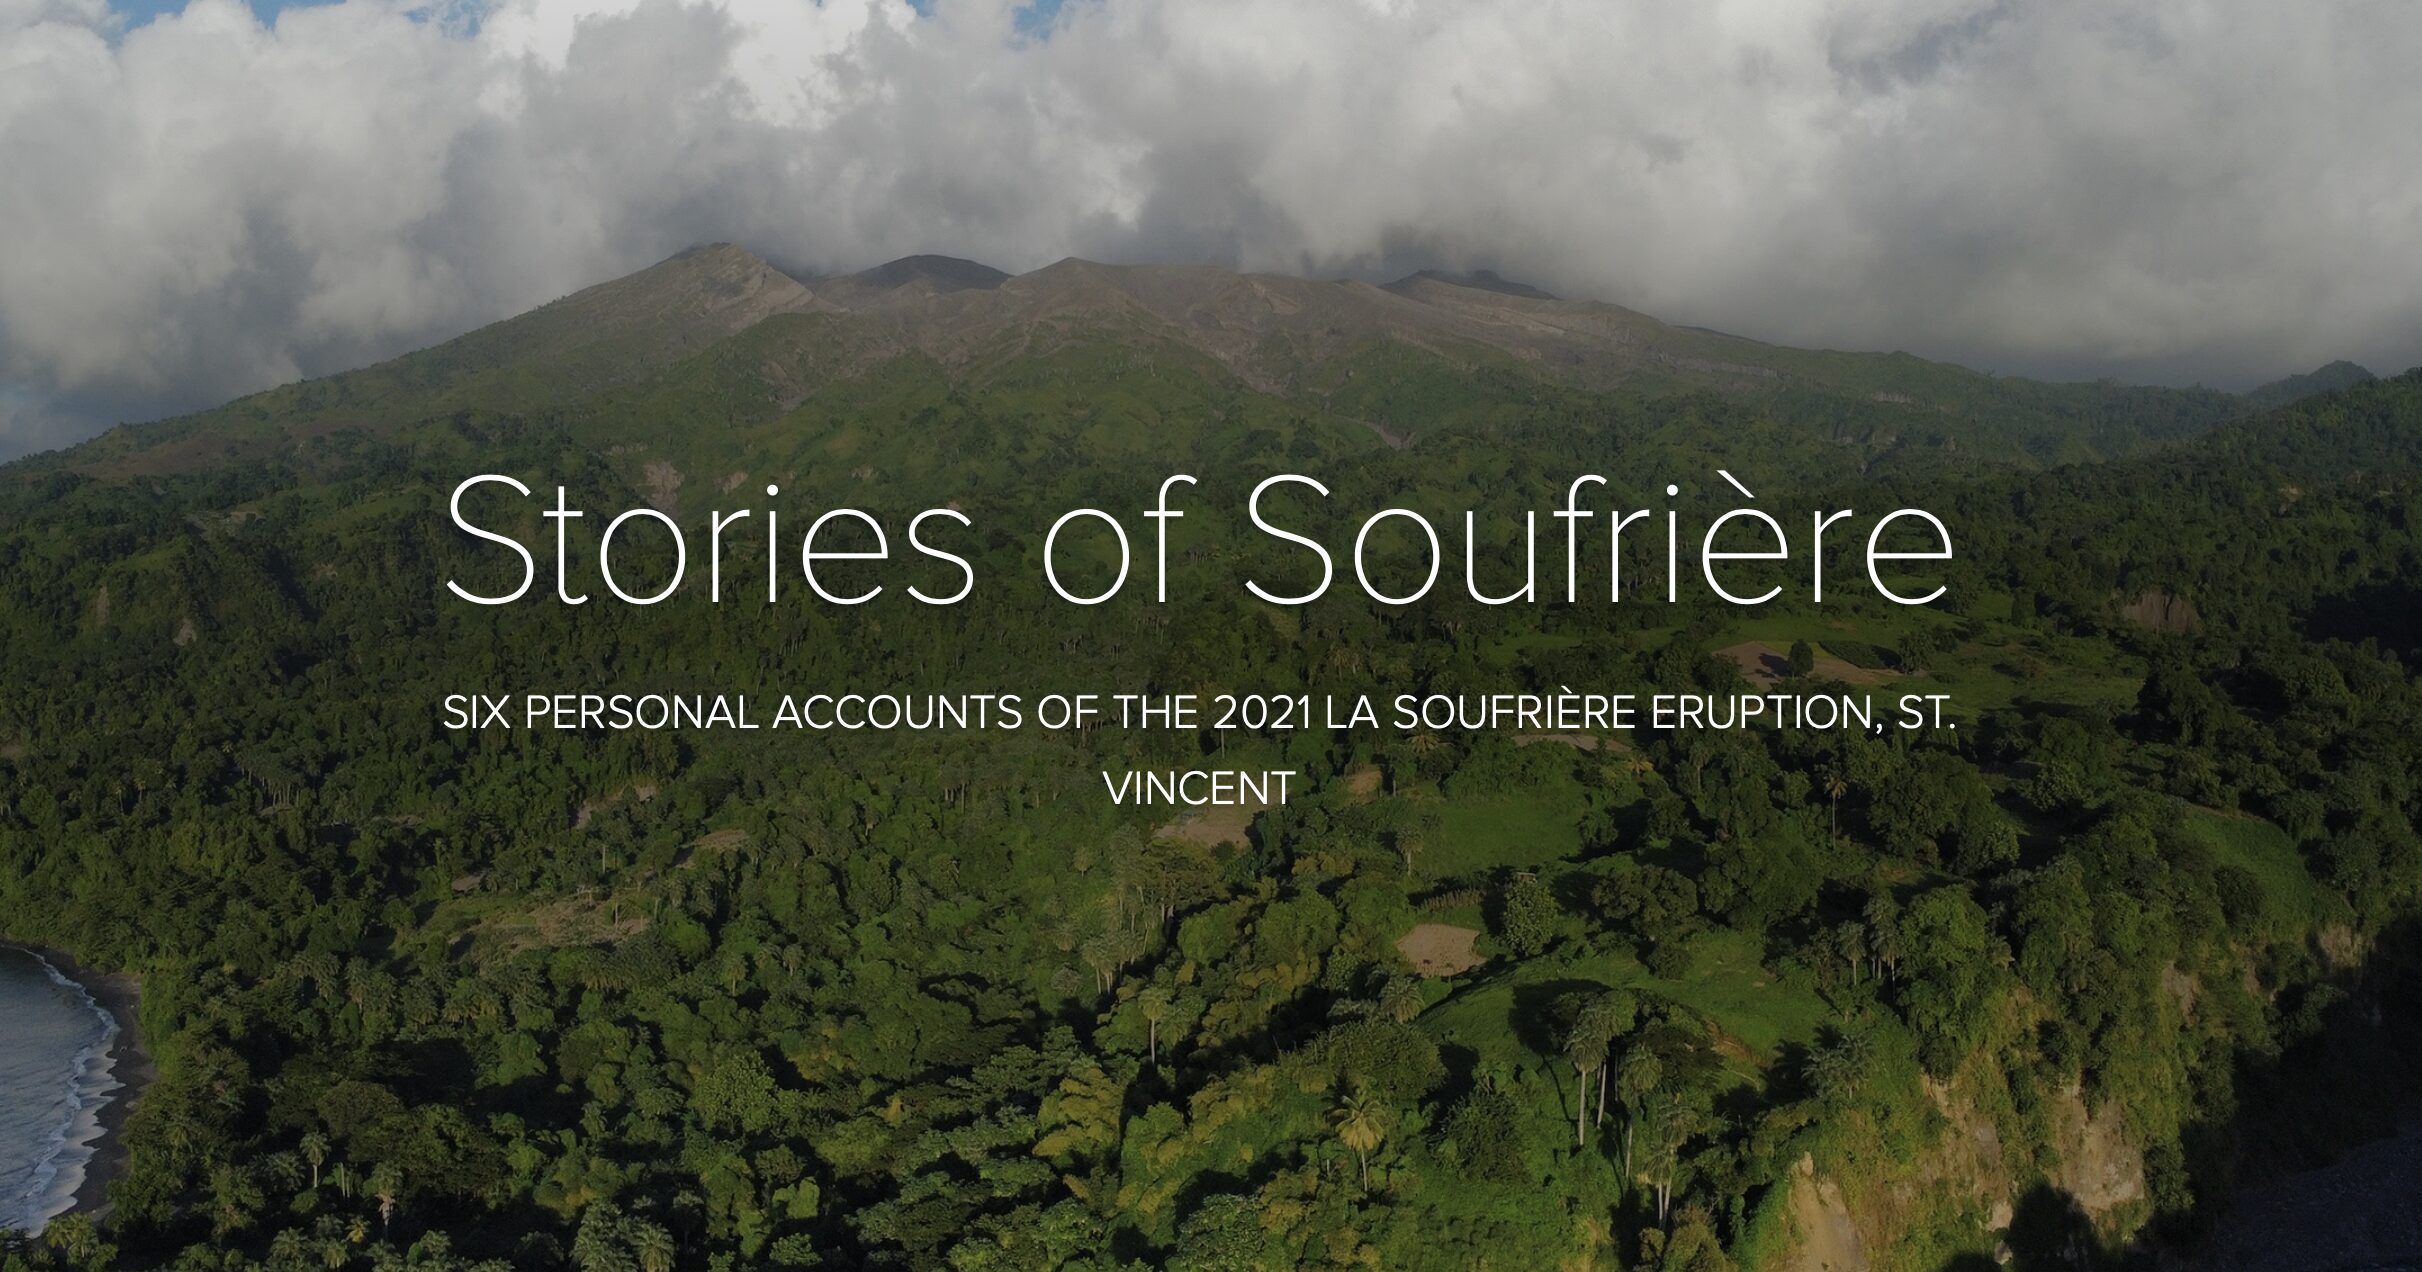 A title card for the story, "Stories of Soufrière".